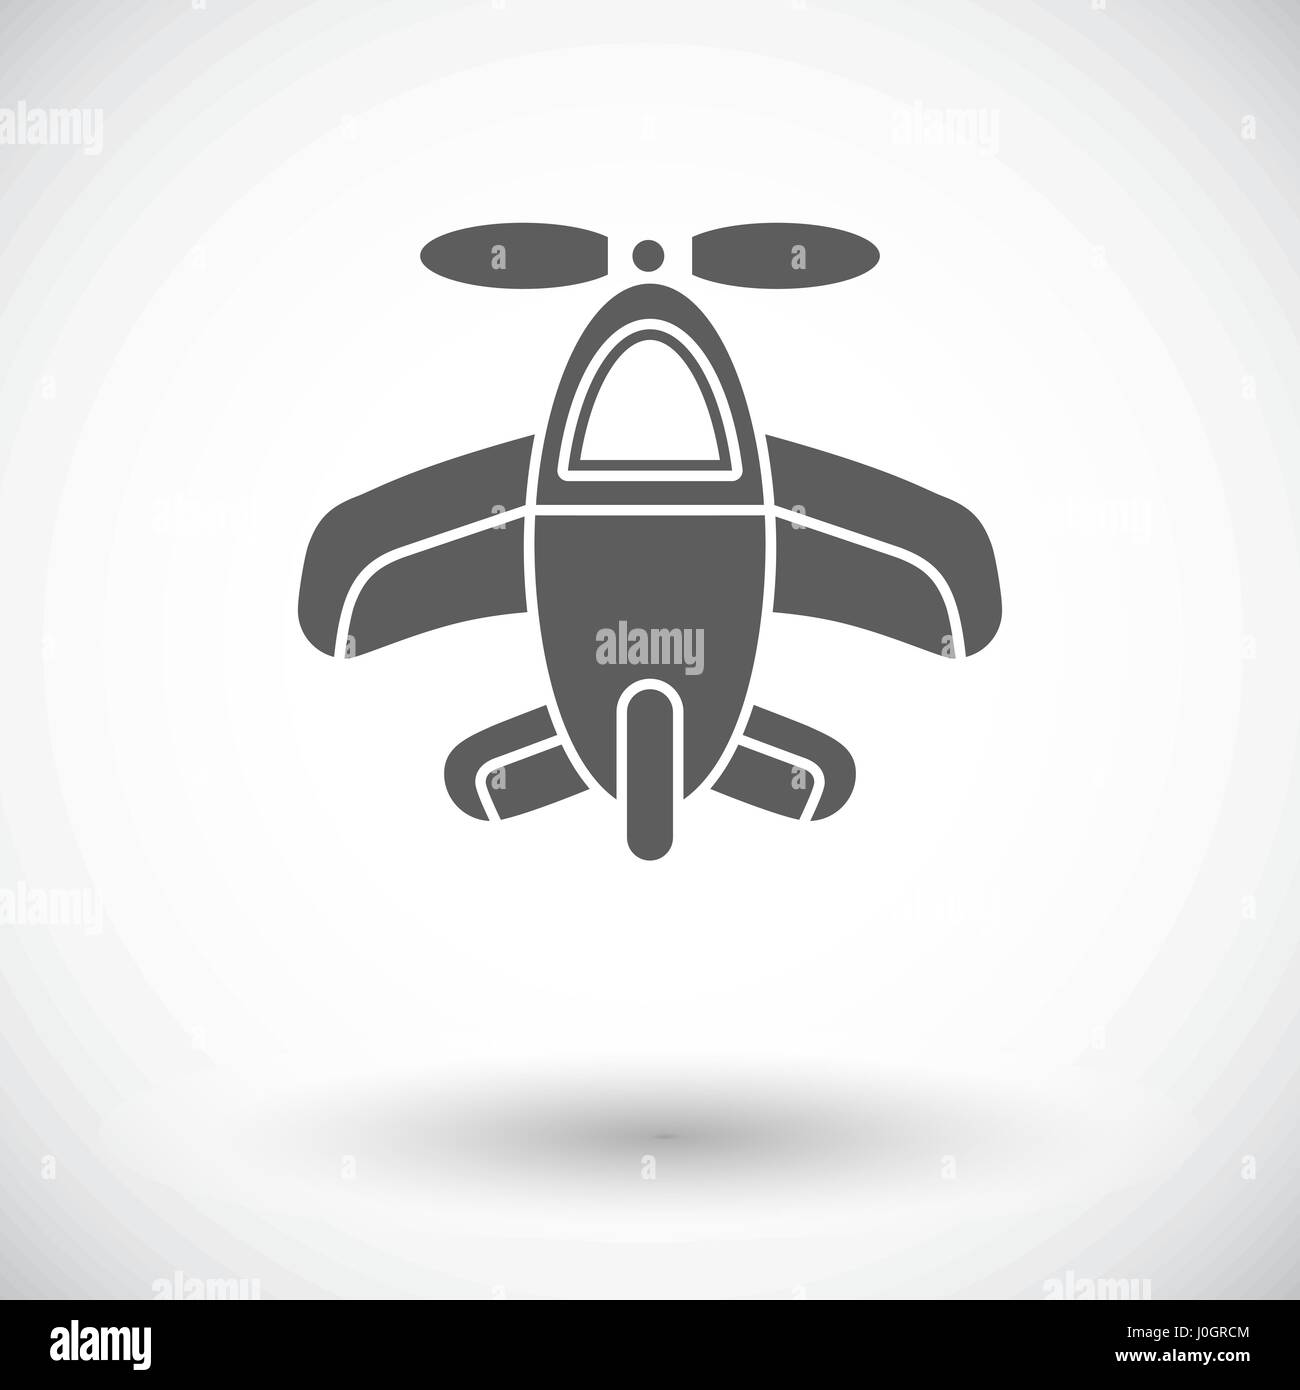 Airplane toy icon. Flat vector related icon for web and mobile applications. It can be used as - logo, pictogram, icon, infographic element. Vector Il Stock Vector